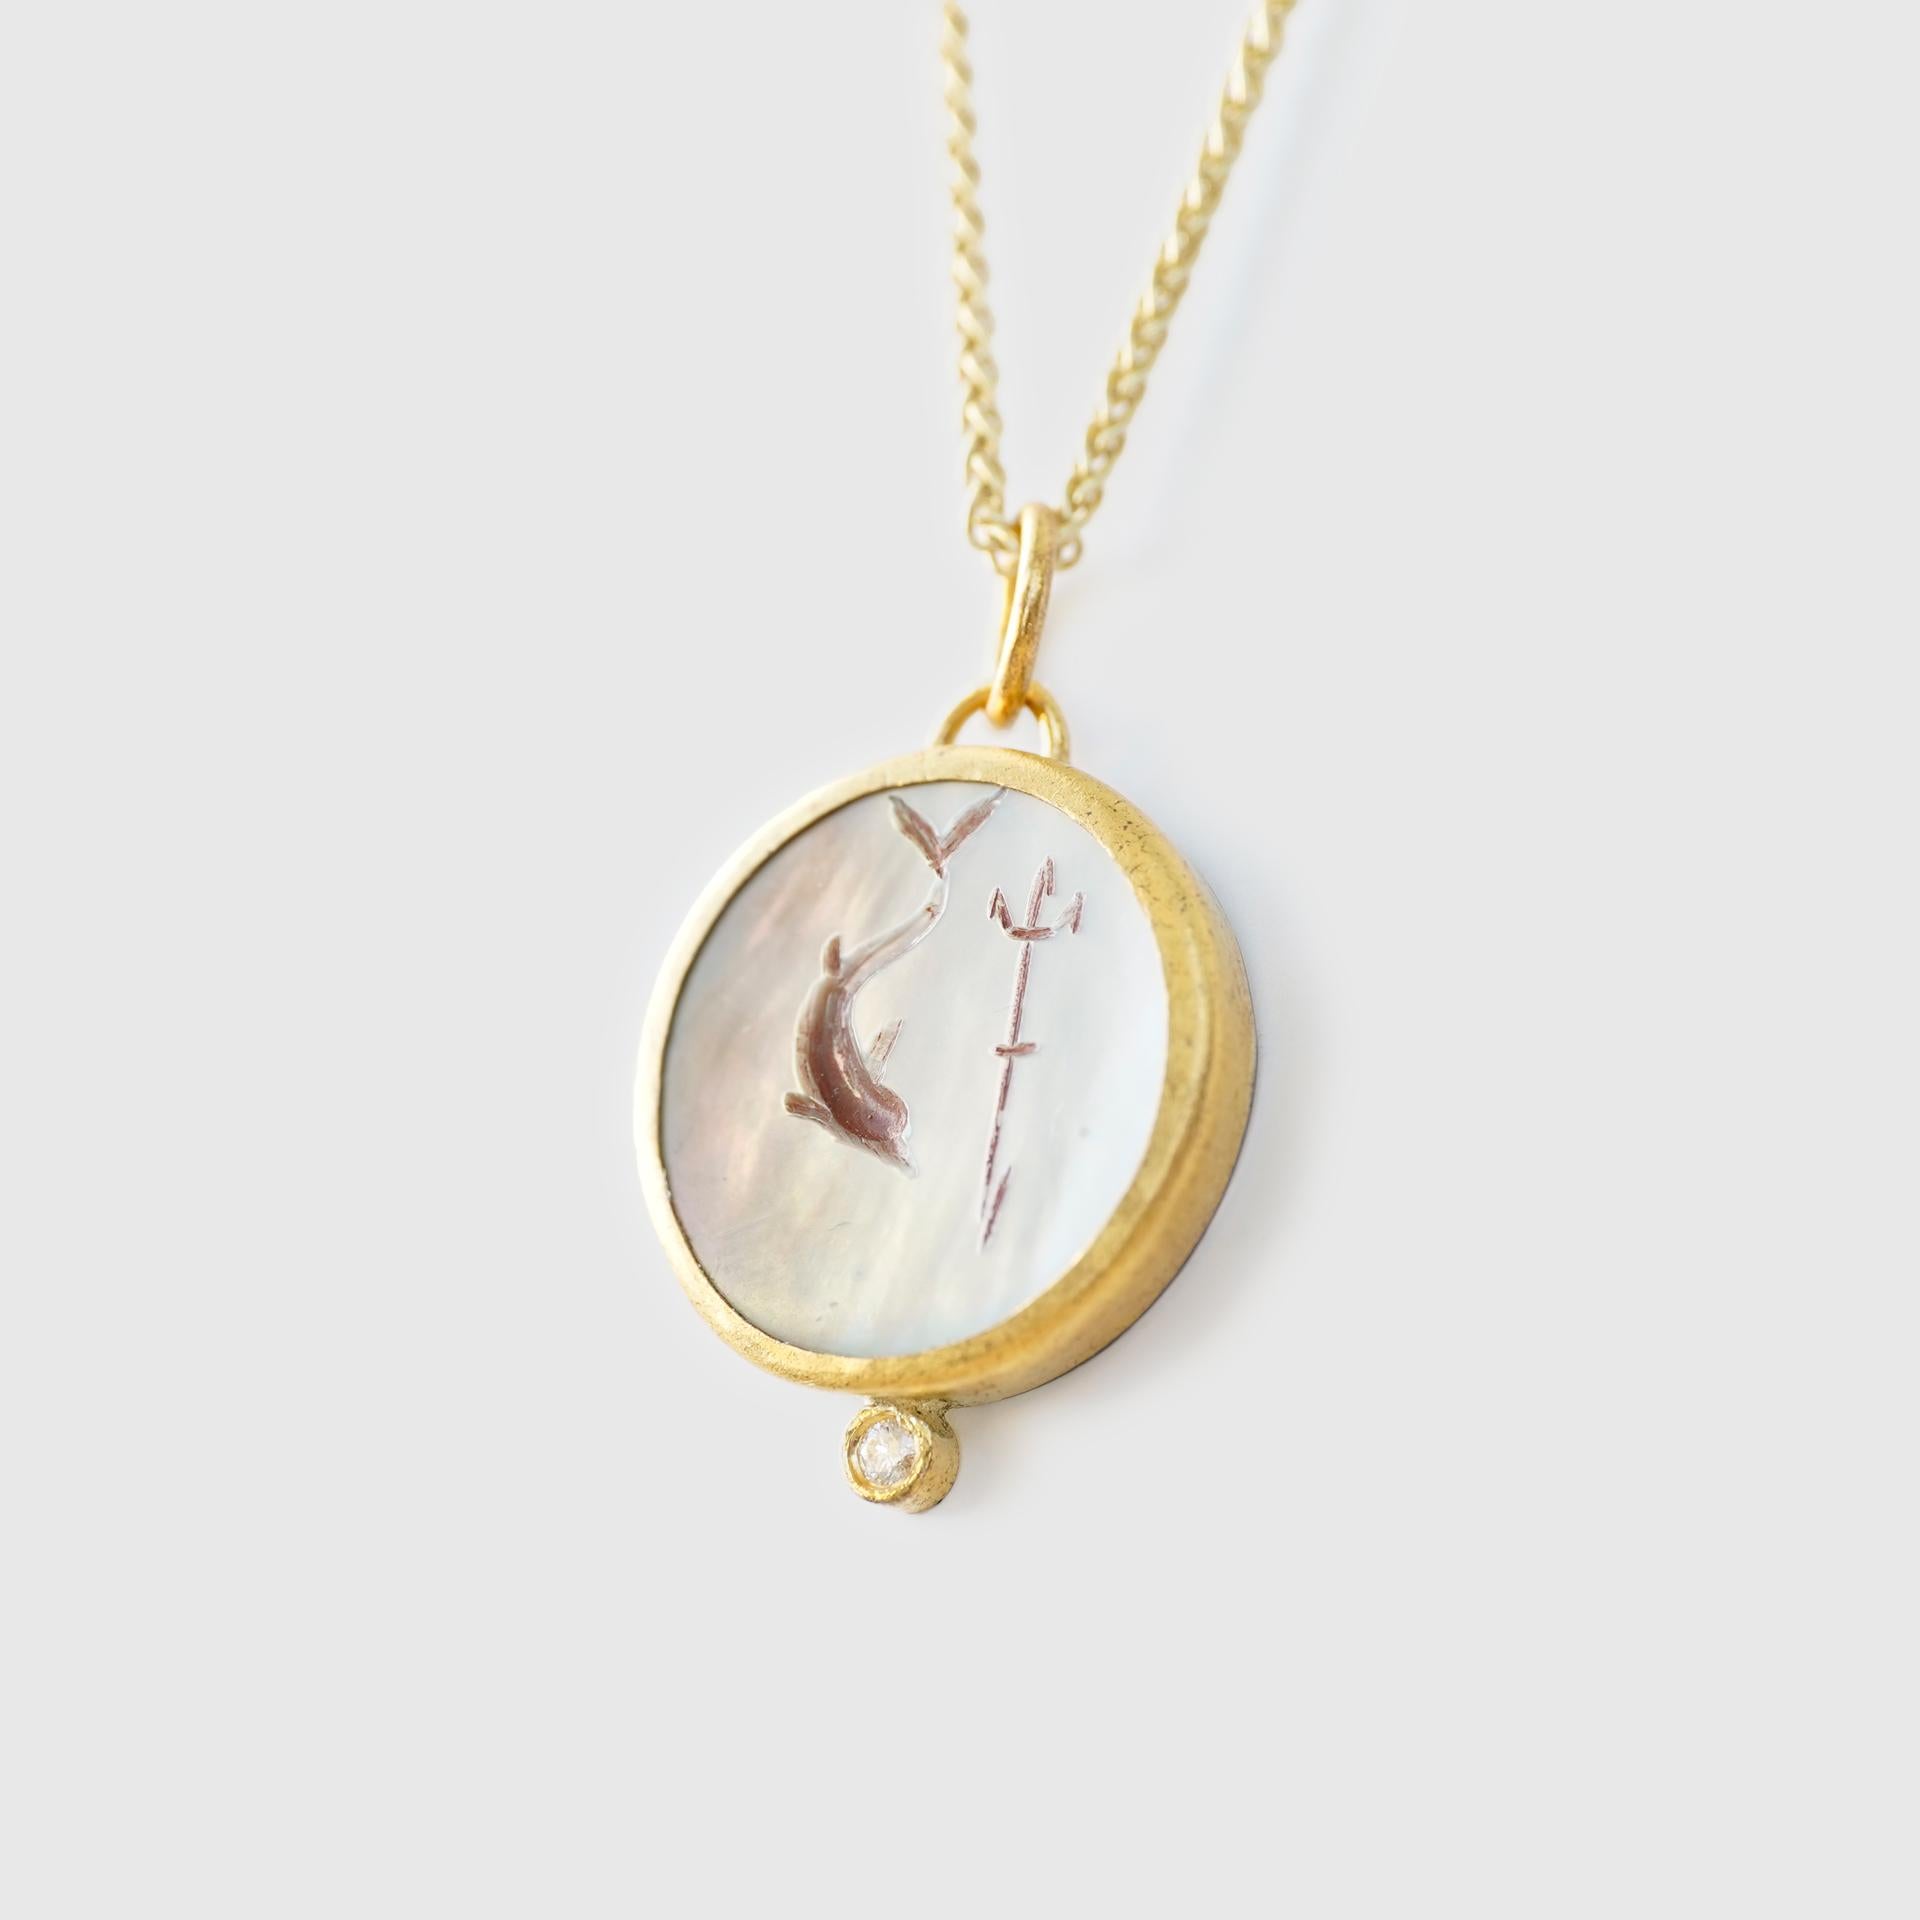 Round Cut Poseidon, Arrow & Dolphin Intaglio Charm 24kt Gold, Carved 6.4ct Mother of Pearl For Sale